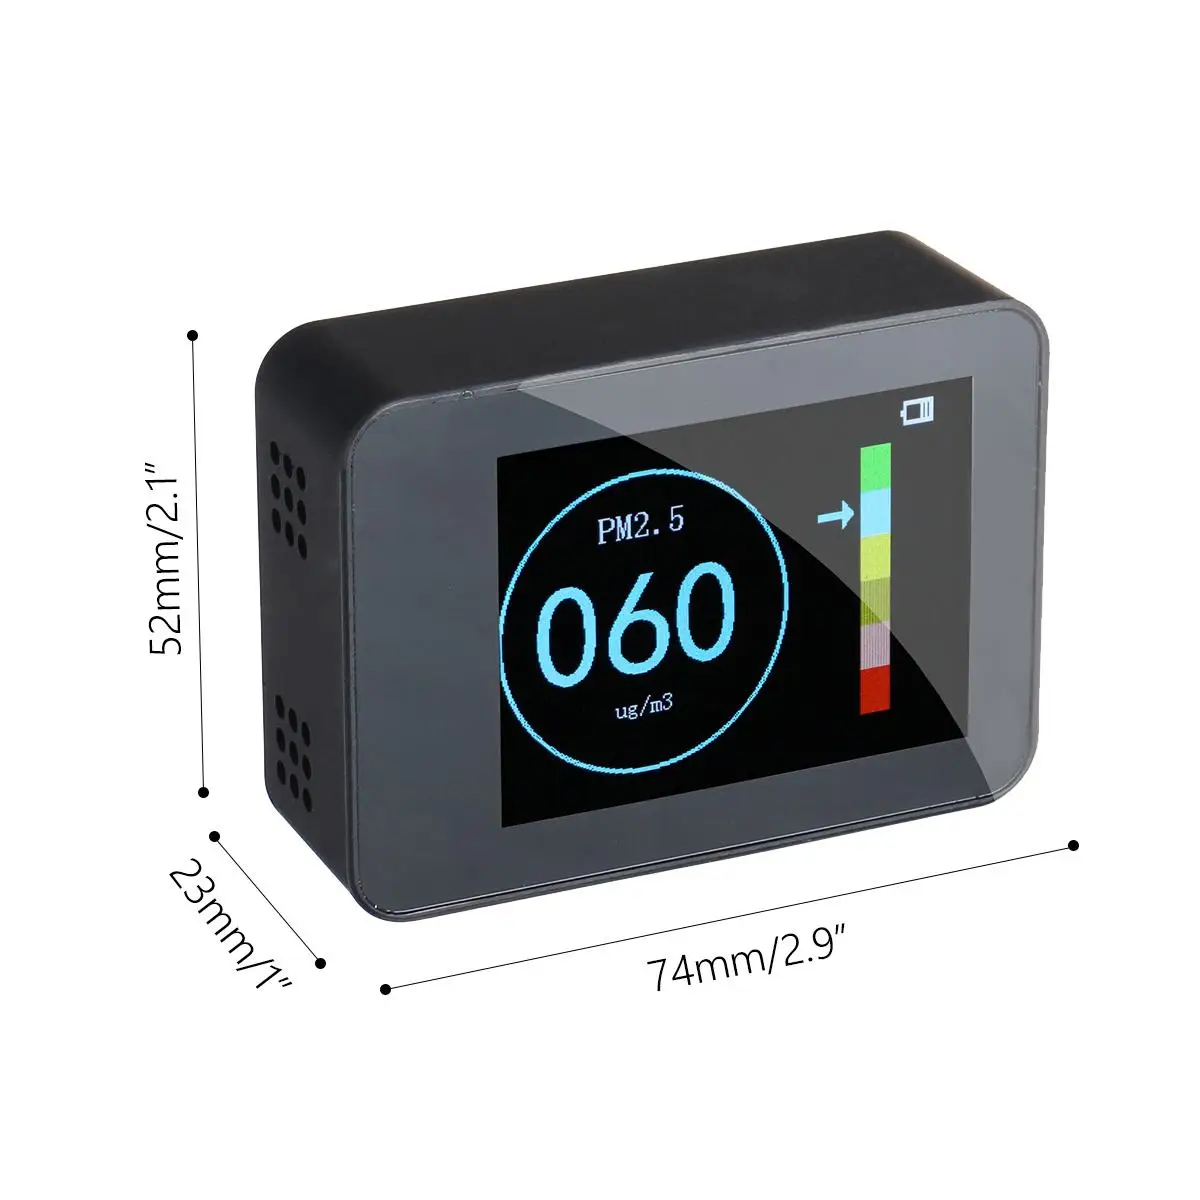 Portable Digital Dispaly PM2.5 Detector Laser Sensor Accurate Home Air Quality Monitor Tester li-ion Battery Diagnostic Tools